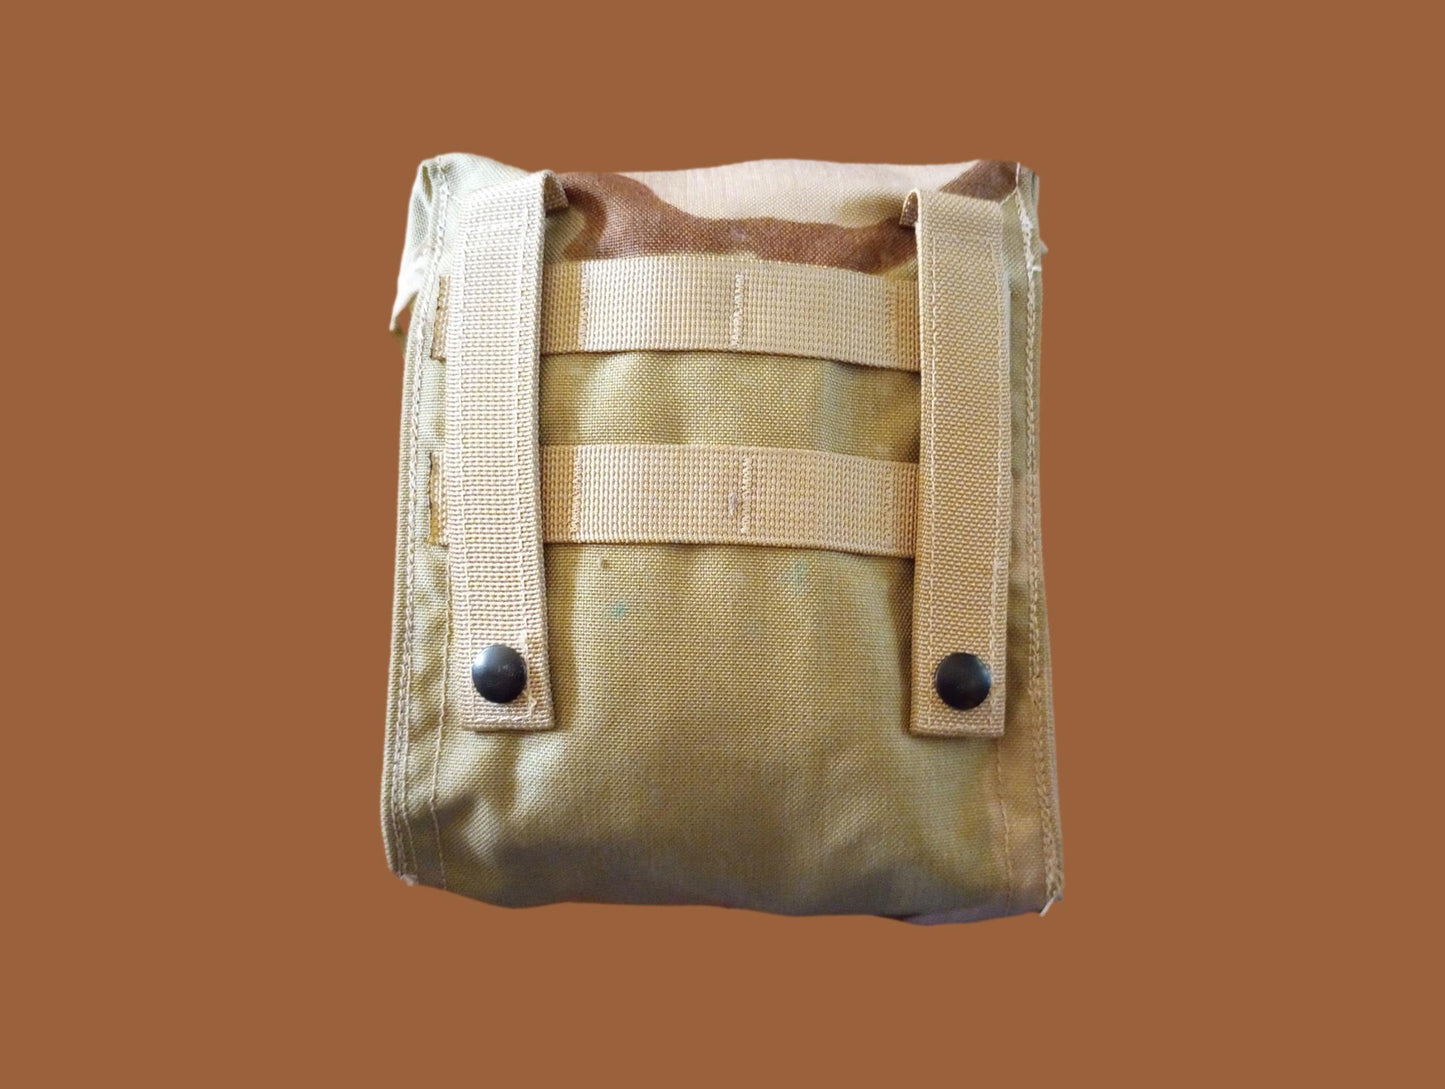 U.S MILITARY ISSUE AMMO DUMP BAG POUCH SMALL ARMS 200 ROUND SAW POUCH .223 CAMO